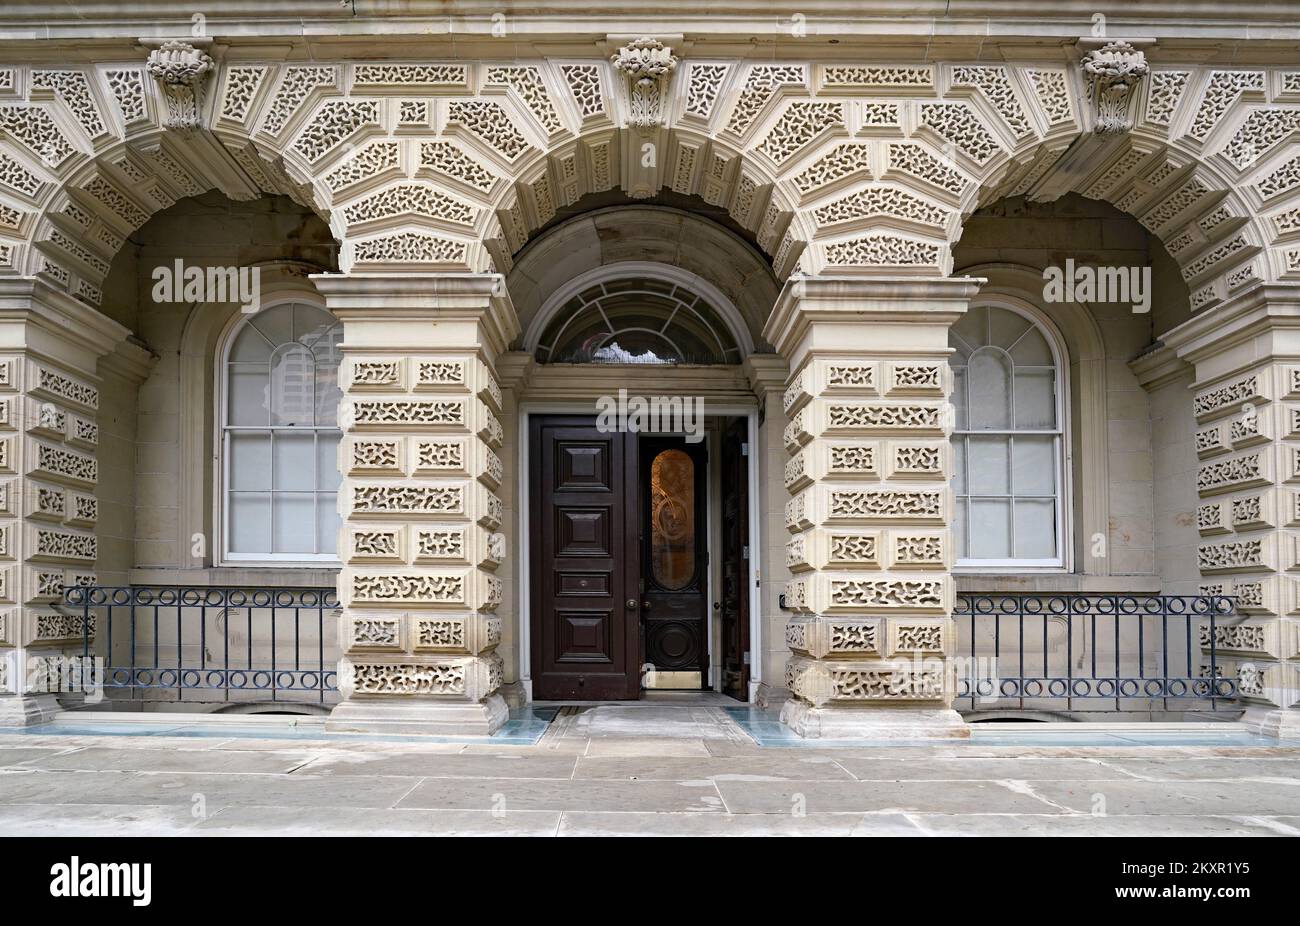 Front door of historic courthouse, Osgoode Hall in Toronto, with carved stone arches Stock Photo